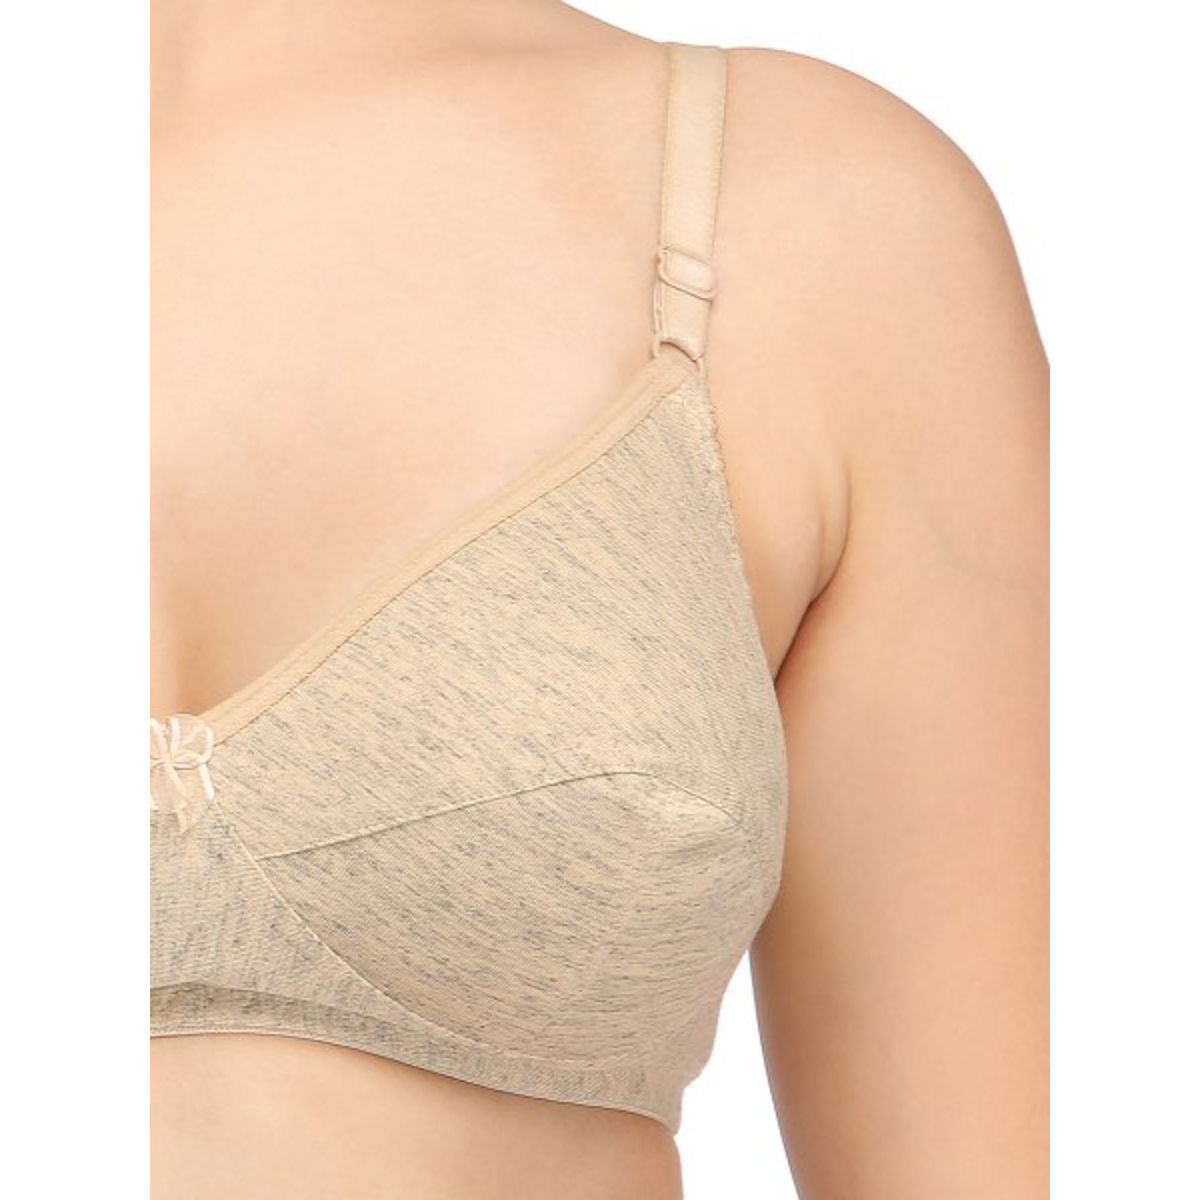 Kenneth Cole Reaction, Intimates & Sleepwear, Kenneth Cole Reaction  Seamless Wirefree Lounge Bras Size Medium Nwt